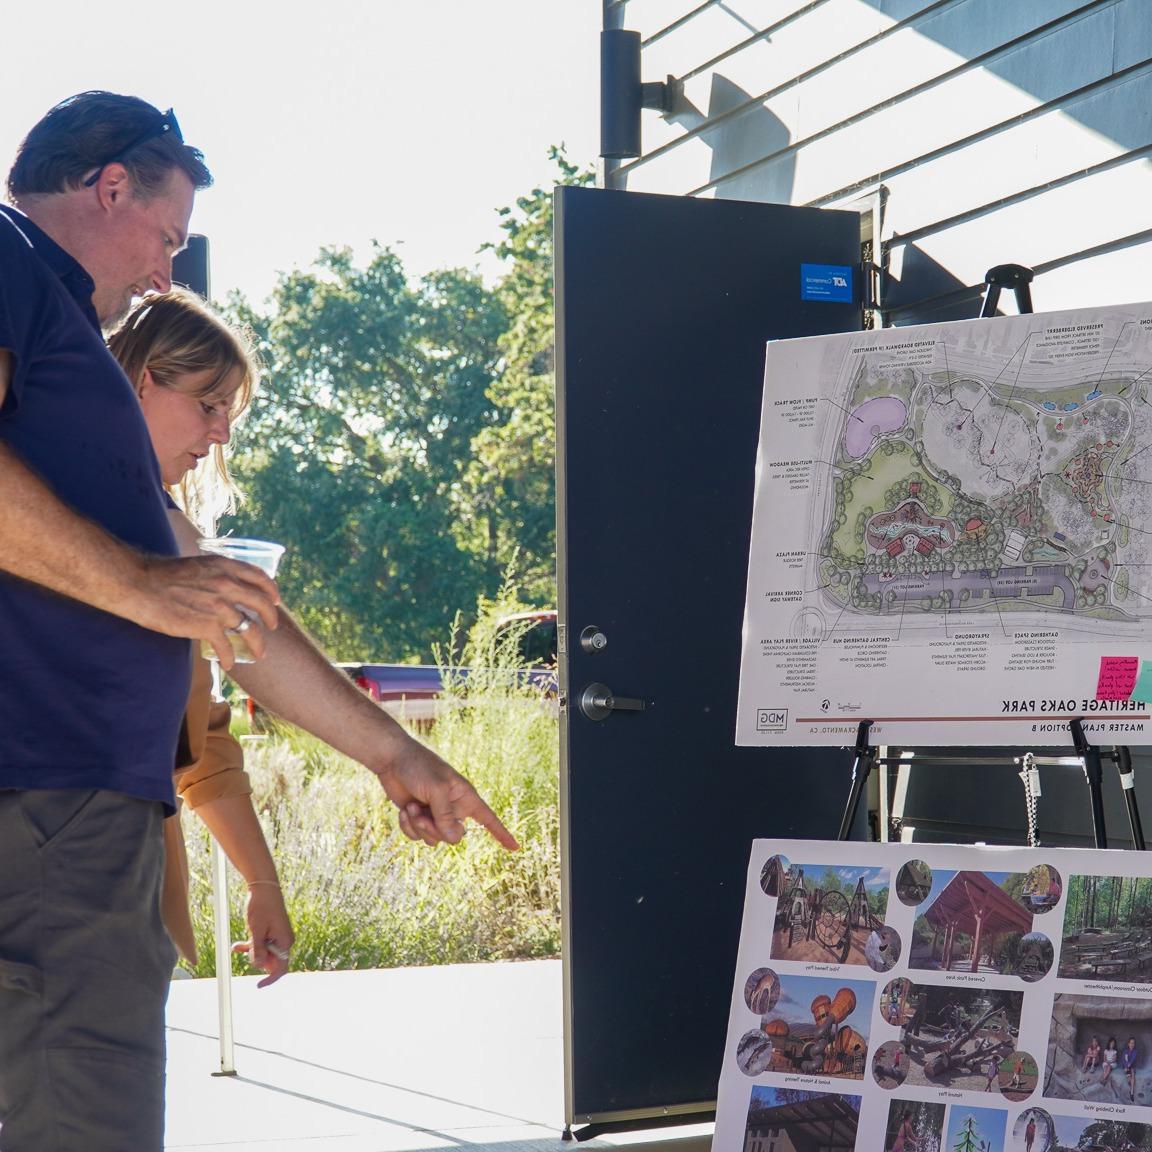 Man and woman pointing at Heritage Oaks Park Project board